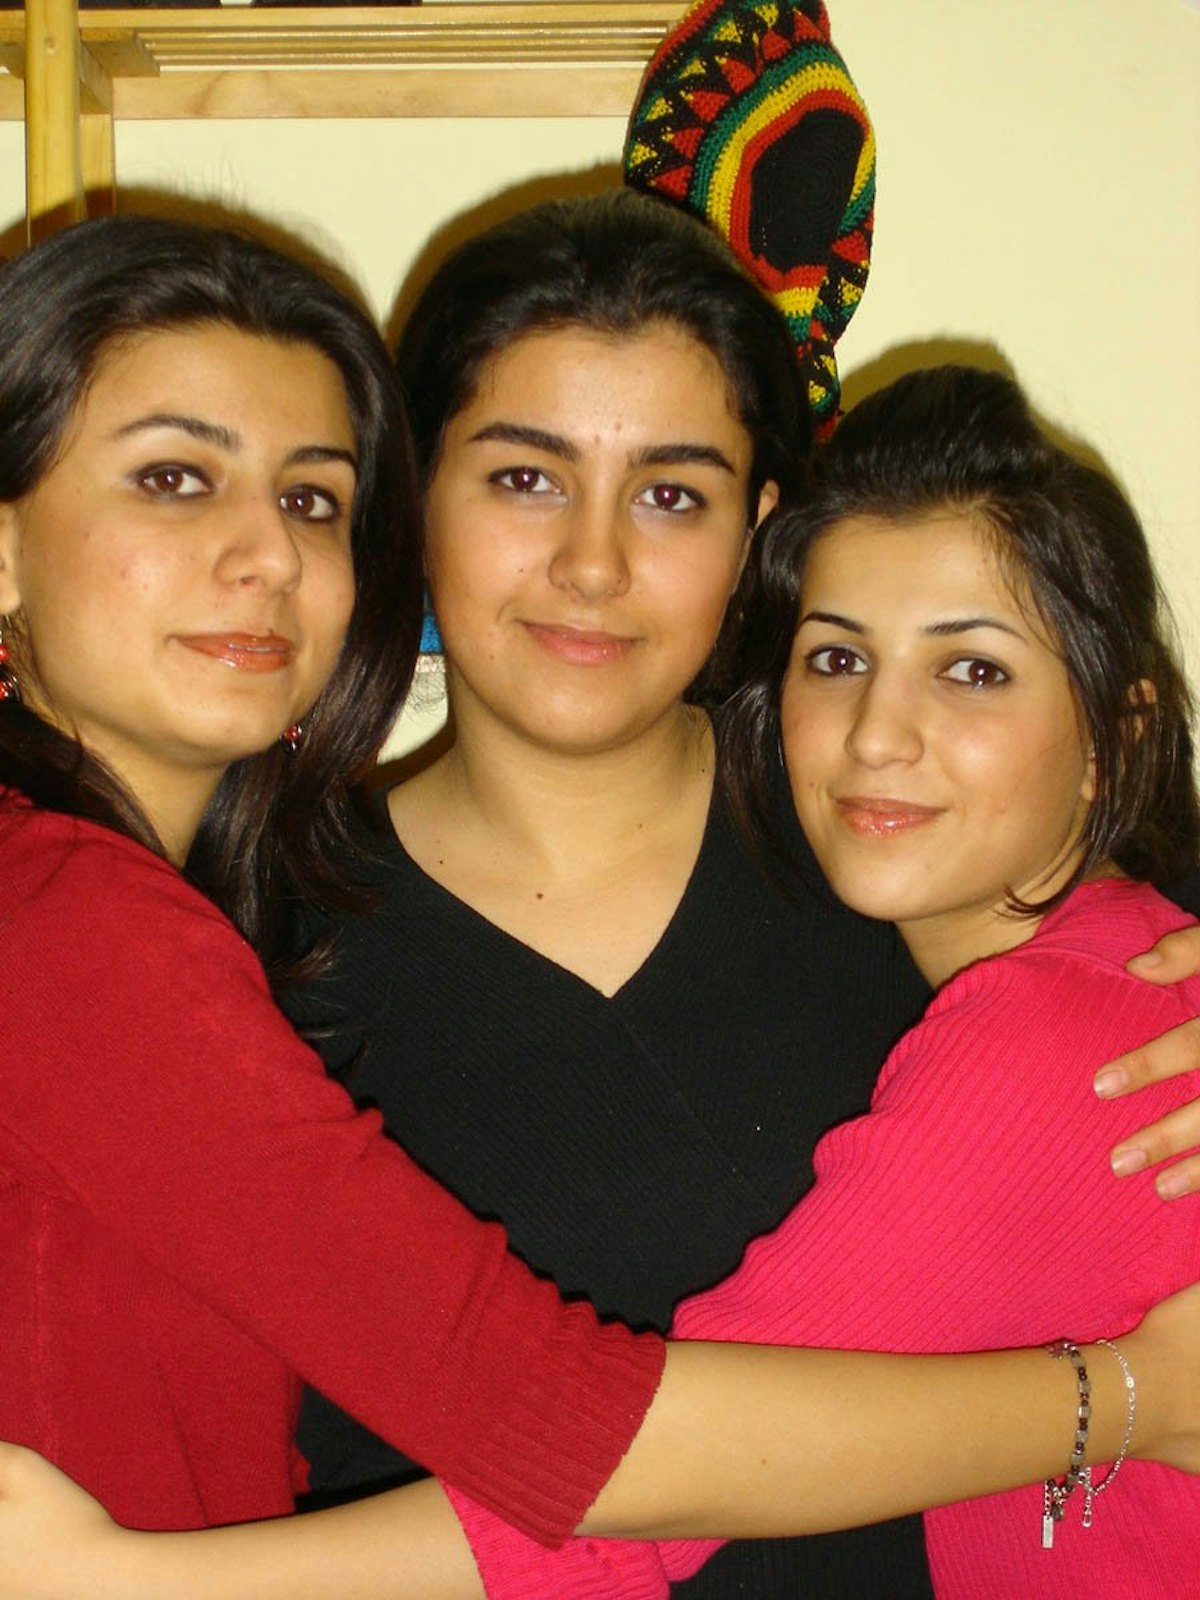 Three of the Baha'í youth arrested in Shiraz, 19 May 2006.